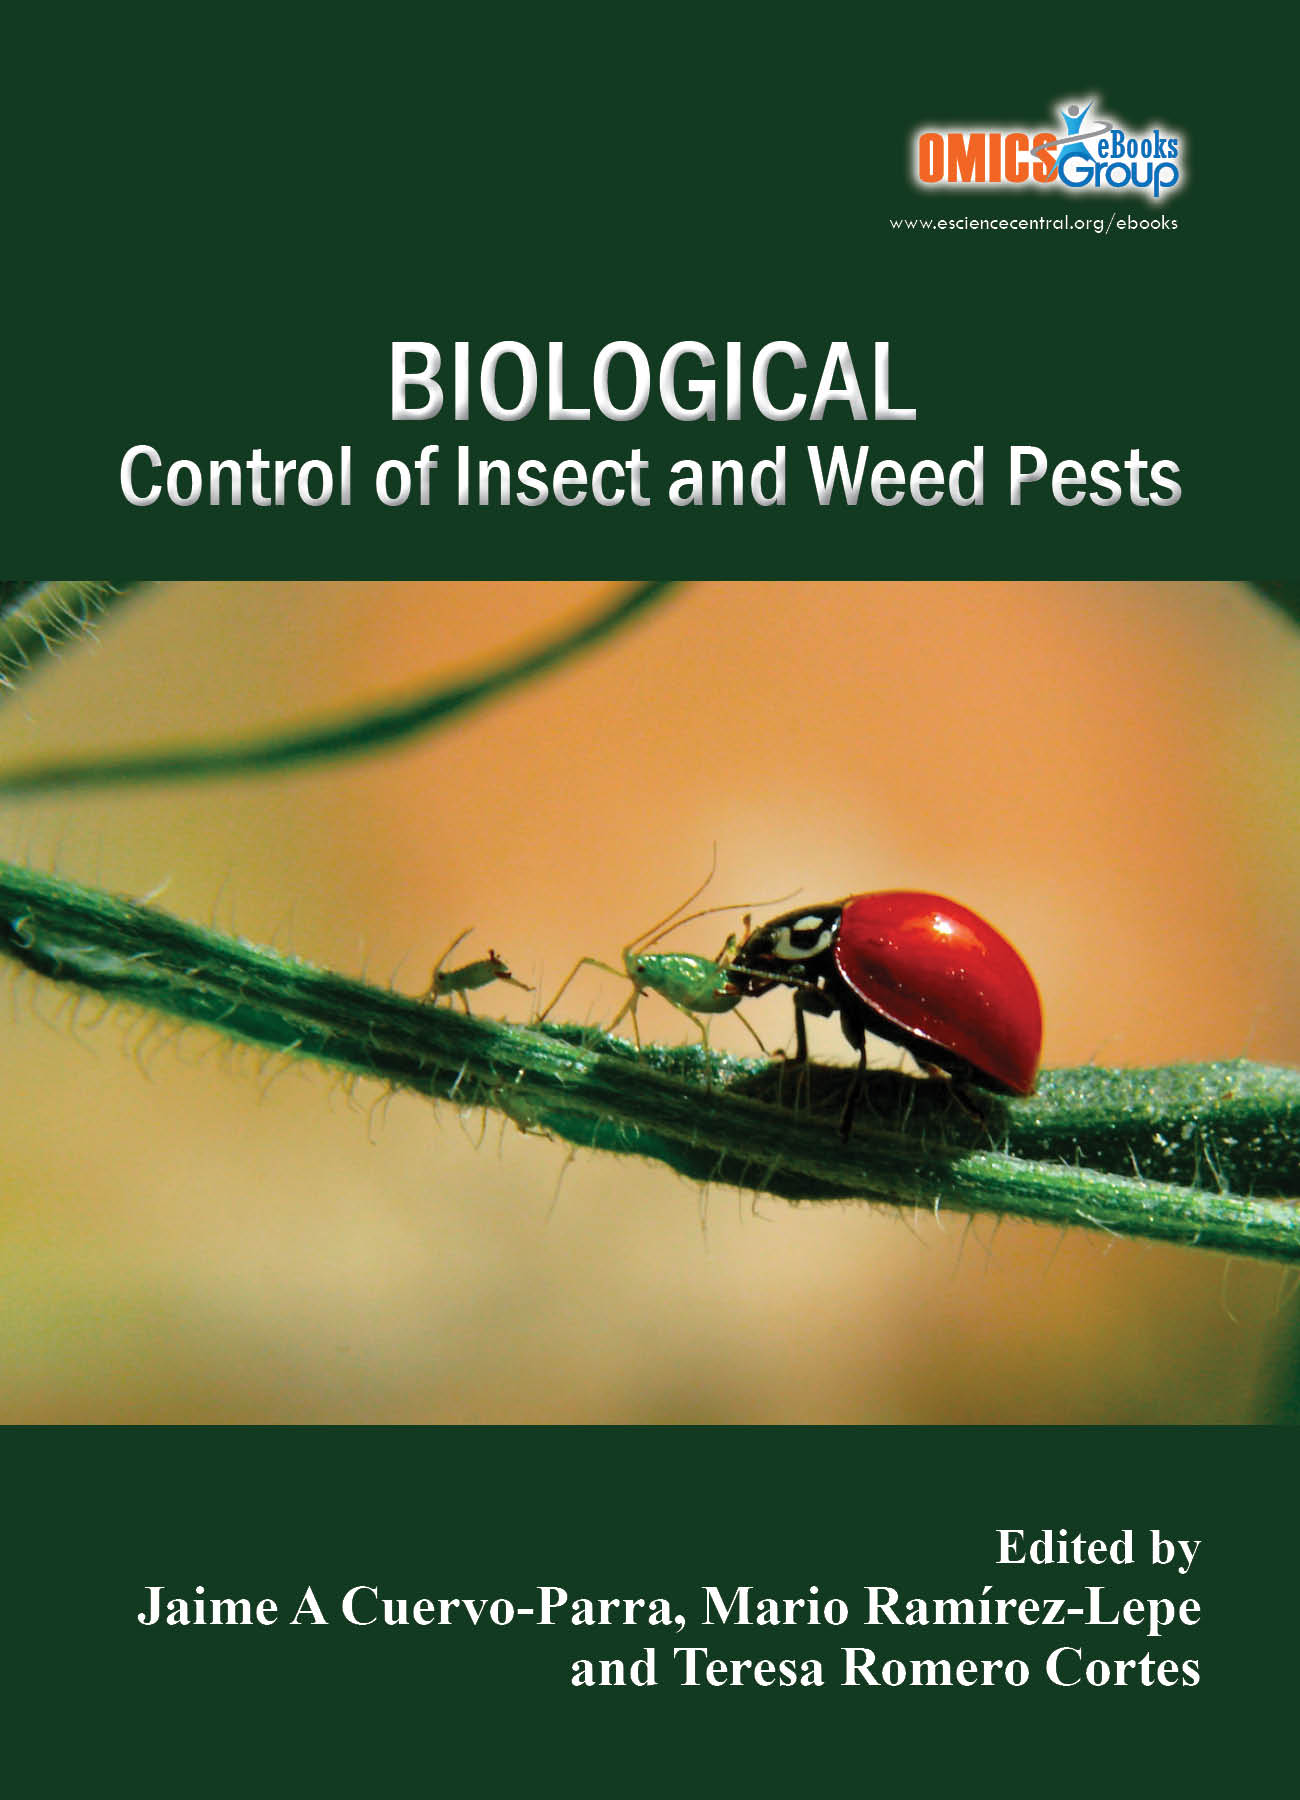 Biological Control of Insect and Weed Pests